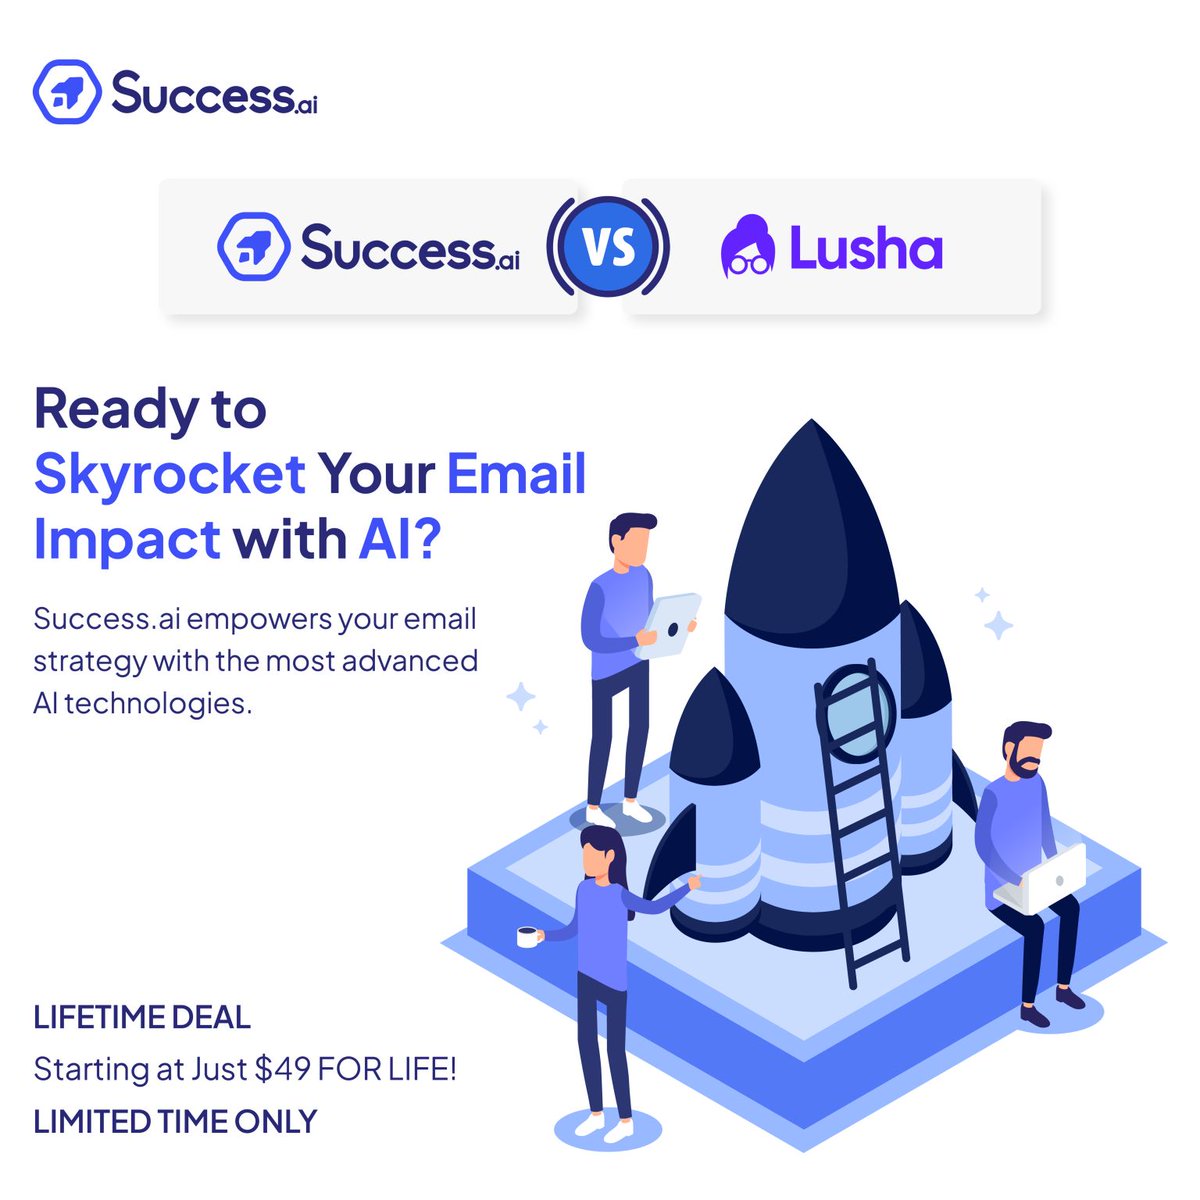 Unlock email success with Success.ai's advanced AI platform! Captivate your audience, automate campaigns, and outshine the competition.
 Compare now:
appsumo.com/products/succe…

#AIEmailEfficiency #SuccessAi #EmailMarketing #B2BLeads #LifetimeDeal